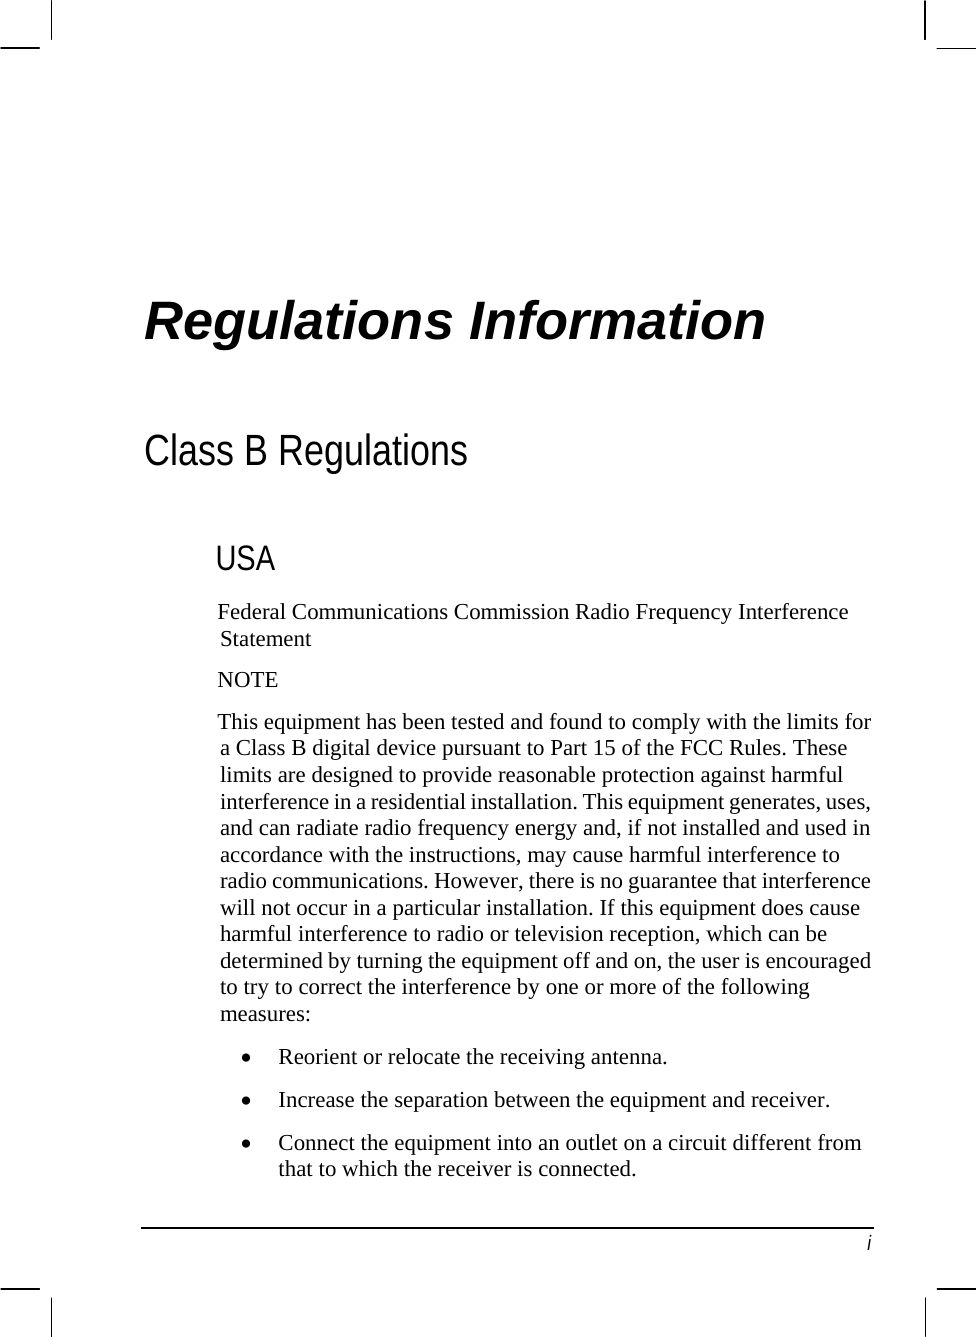  Regulations Information Class B Regulations USA  t  armful     owing m•  a circuit different from that to which the receiver is connected. Federal Communications Commission Radio Frequency InterferenceStatemenNOTEThis equipment has been tested and found to comply with the limits for a Class B digital device pursuant to Part 15 of the FCC Rules. These limits are designed to provide reasonable protection against hinterference in a residential installation. This equipment generates, uses,and can radiate radio frequency energy and, if not installed and used inaccordance with the instructions, may cause harmful interference to radio communications. However, there is no guarantee that interference will not occur in a particular installation. If this equipment does causeharmful interference to radio or television reception, which can be determined by turning the equipment off and on, the user is encouraged to try to correct the interference by one or more of the folleasures: • Reorient or relocate the receiving antenna. • Increase the separation between the equipment and receiver. Connect the equipment into an outlet on i 